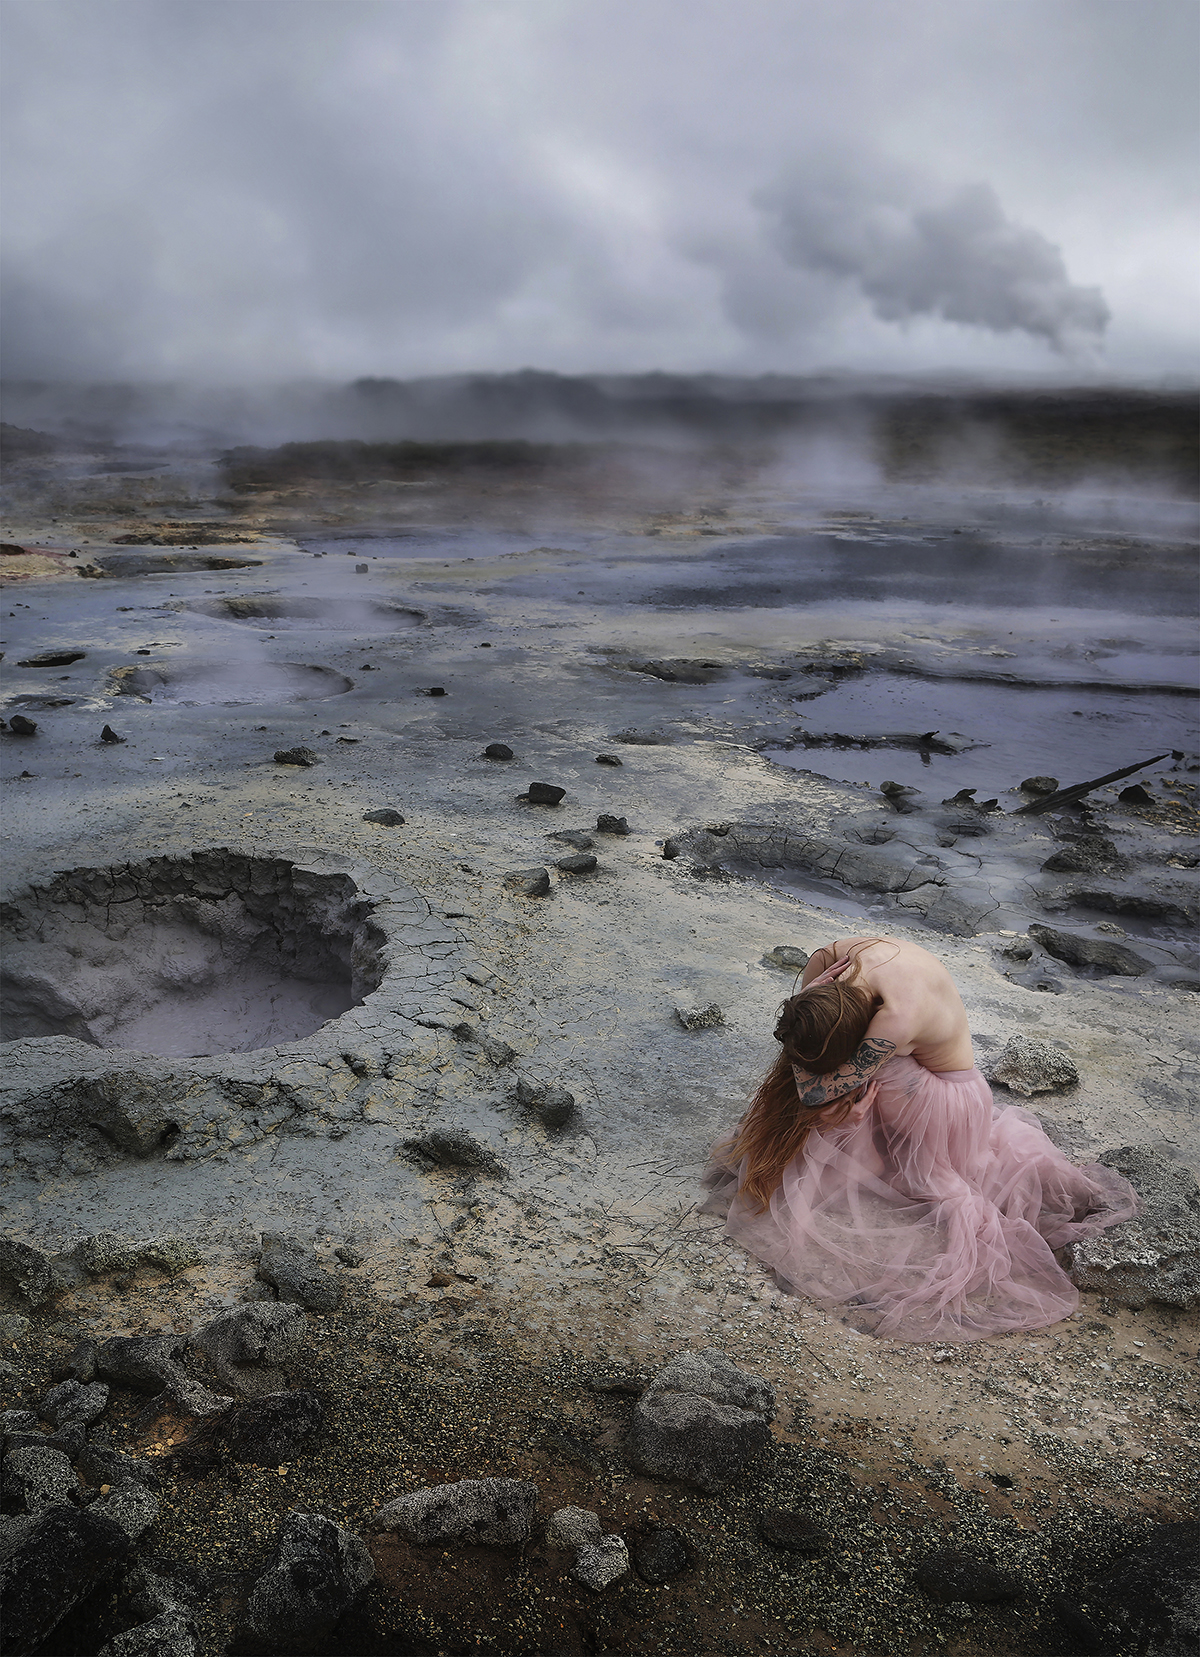 A woman crouched over in a pink skirt on a volcanic landscape